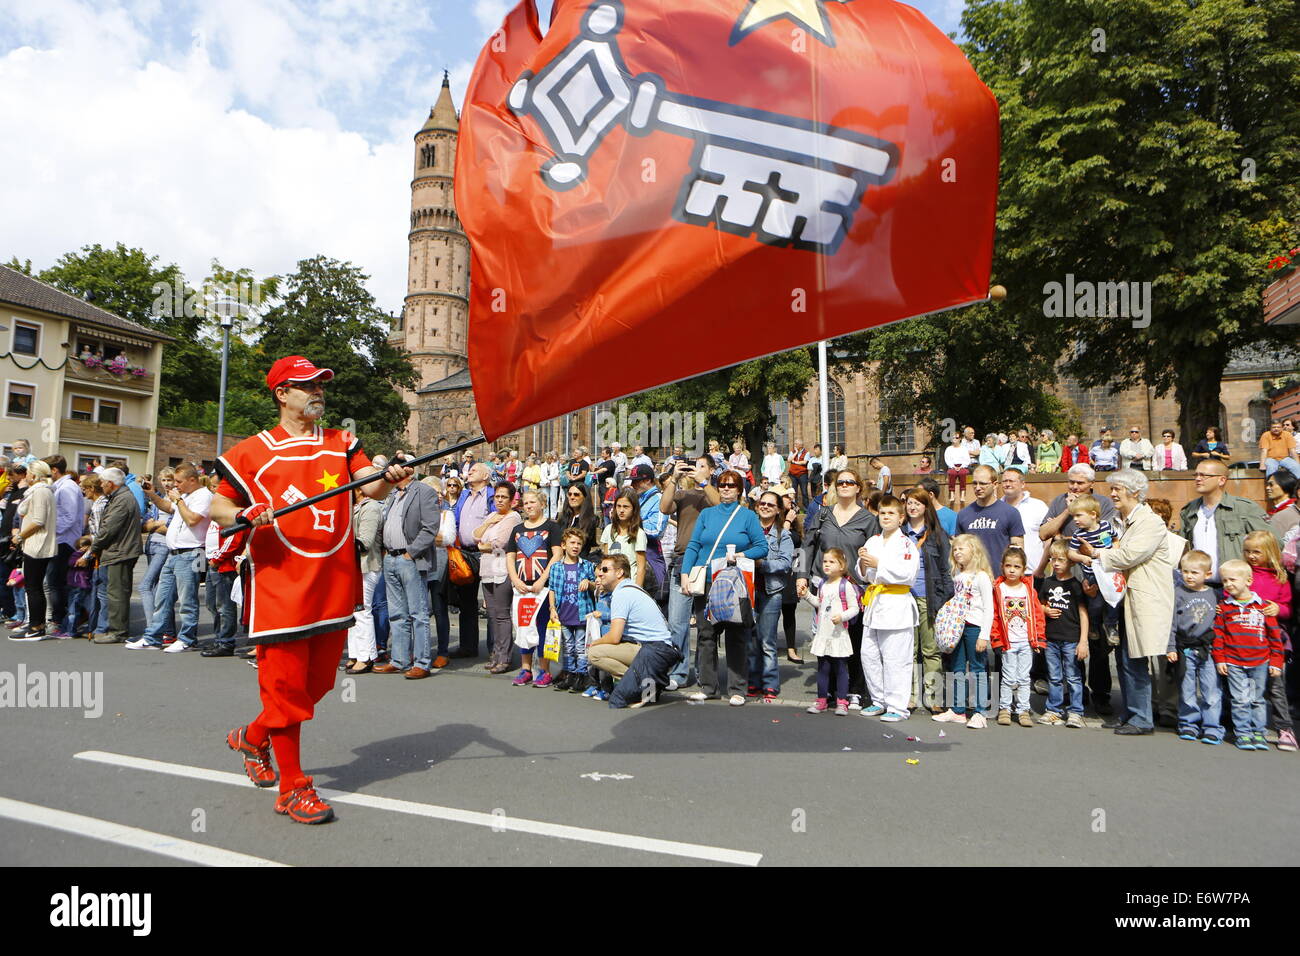 Worms, Germany. 31st Aug, 2014. A color guard with a red flag with the coat of arms of Worms marches in the Backfischfest parade 2014. The cathedral of Worms can be seen in the background. The first highlight of this year's Backfischfest was the big parade through the city of Worms with 125 groups and floats. Community groups, sport clubs, music groups and business from Worms and further afield took part. © Michael Debets/Pacific Press/Alamy Live News Stock Photo